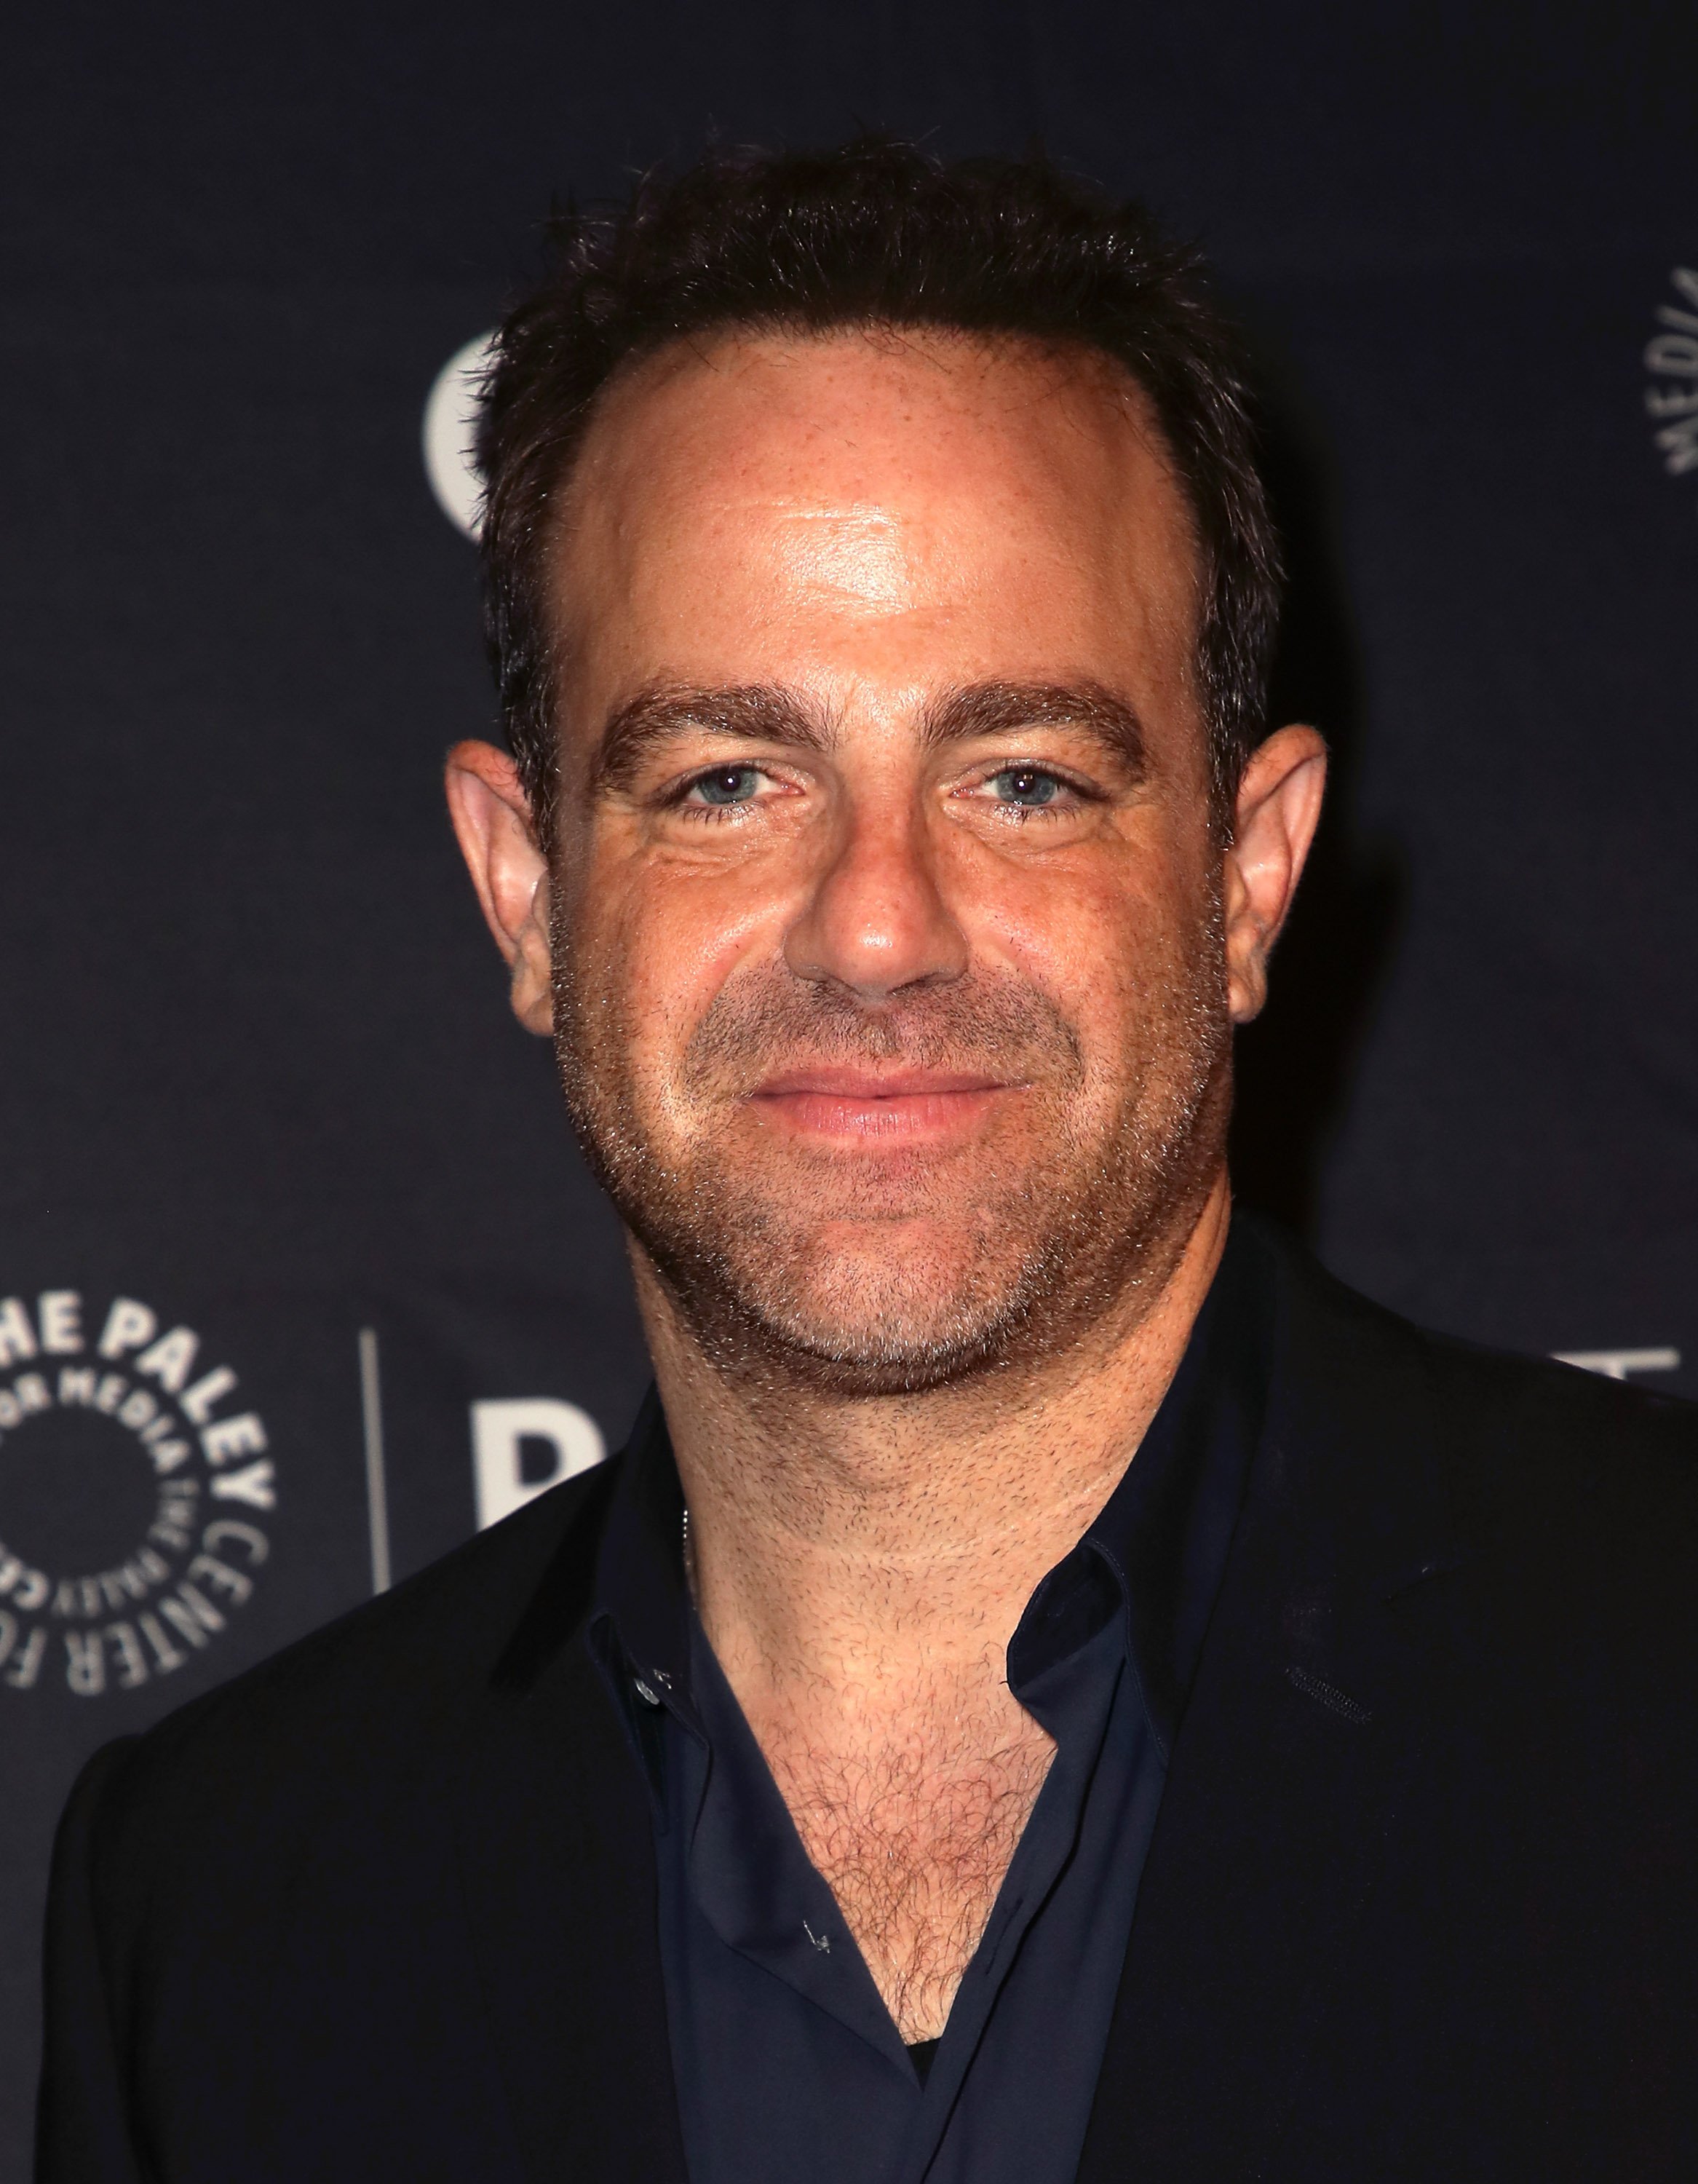 Paul Adelstein from "I Feel Bad" attends The Paley Center for Media's 2018 PaleyFest Fall TV Previews - NBC at The Paley Center for Media on September 10, 2018, in Beverly Hills, California. | Source: Getty Images.